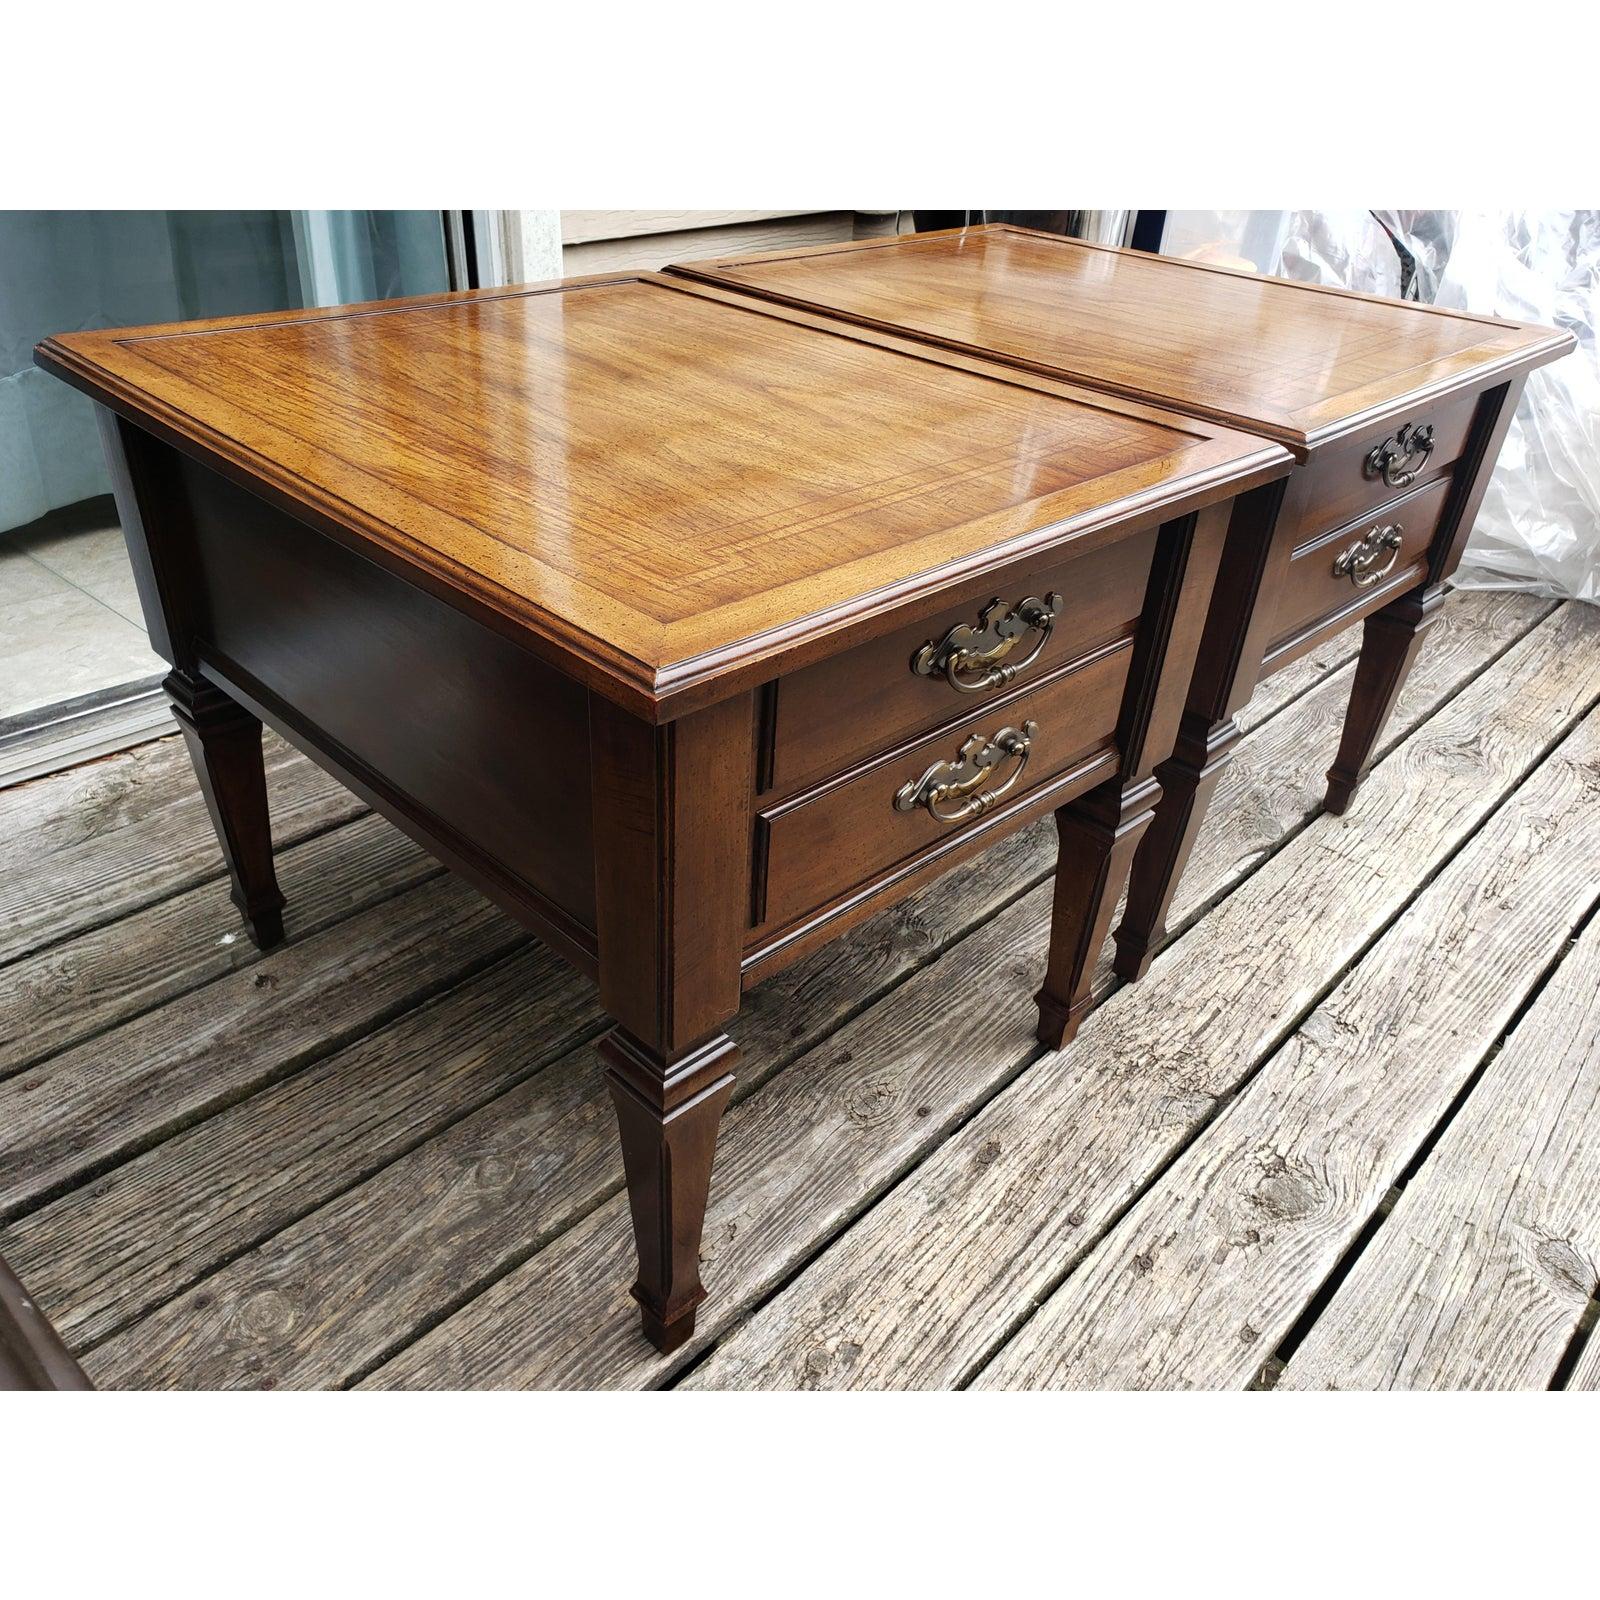 Rare vintage Brandt Ambassador end tables/nightstands with unique design tops and large heavy brass handles.
Measures: 22 W x 27 D x 21 H.